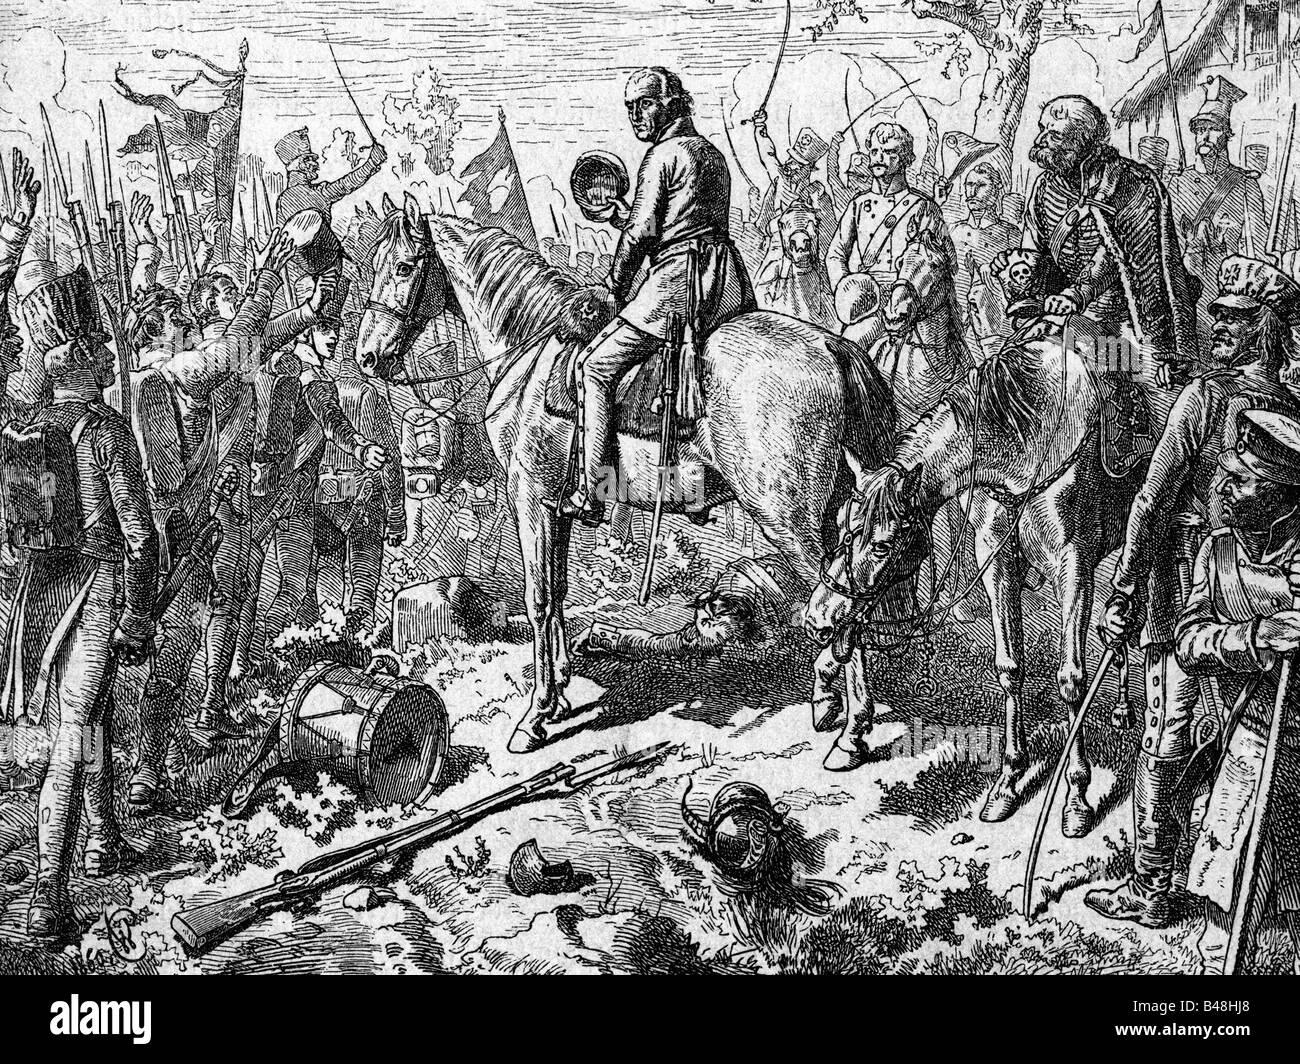 Yorck von Wartenburg, Ludwig Graf, 26.9.1759 - 4.10.1830, Prussian general, salute the heroes from life regiment, War of Liberation 1813 / 1814, engraving, 19th century, Stock Photo